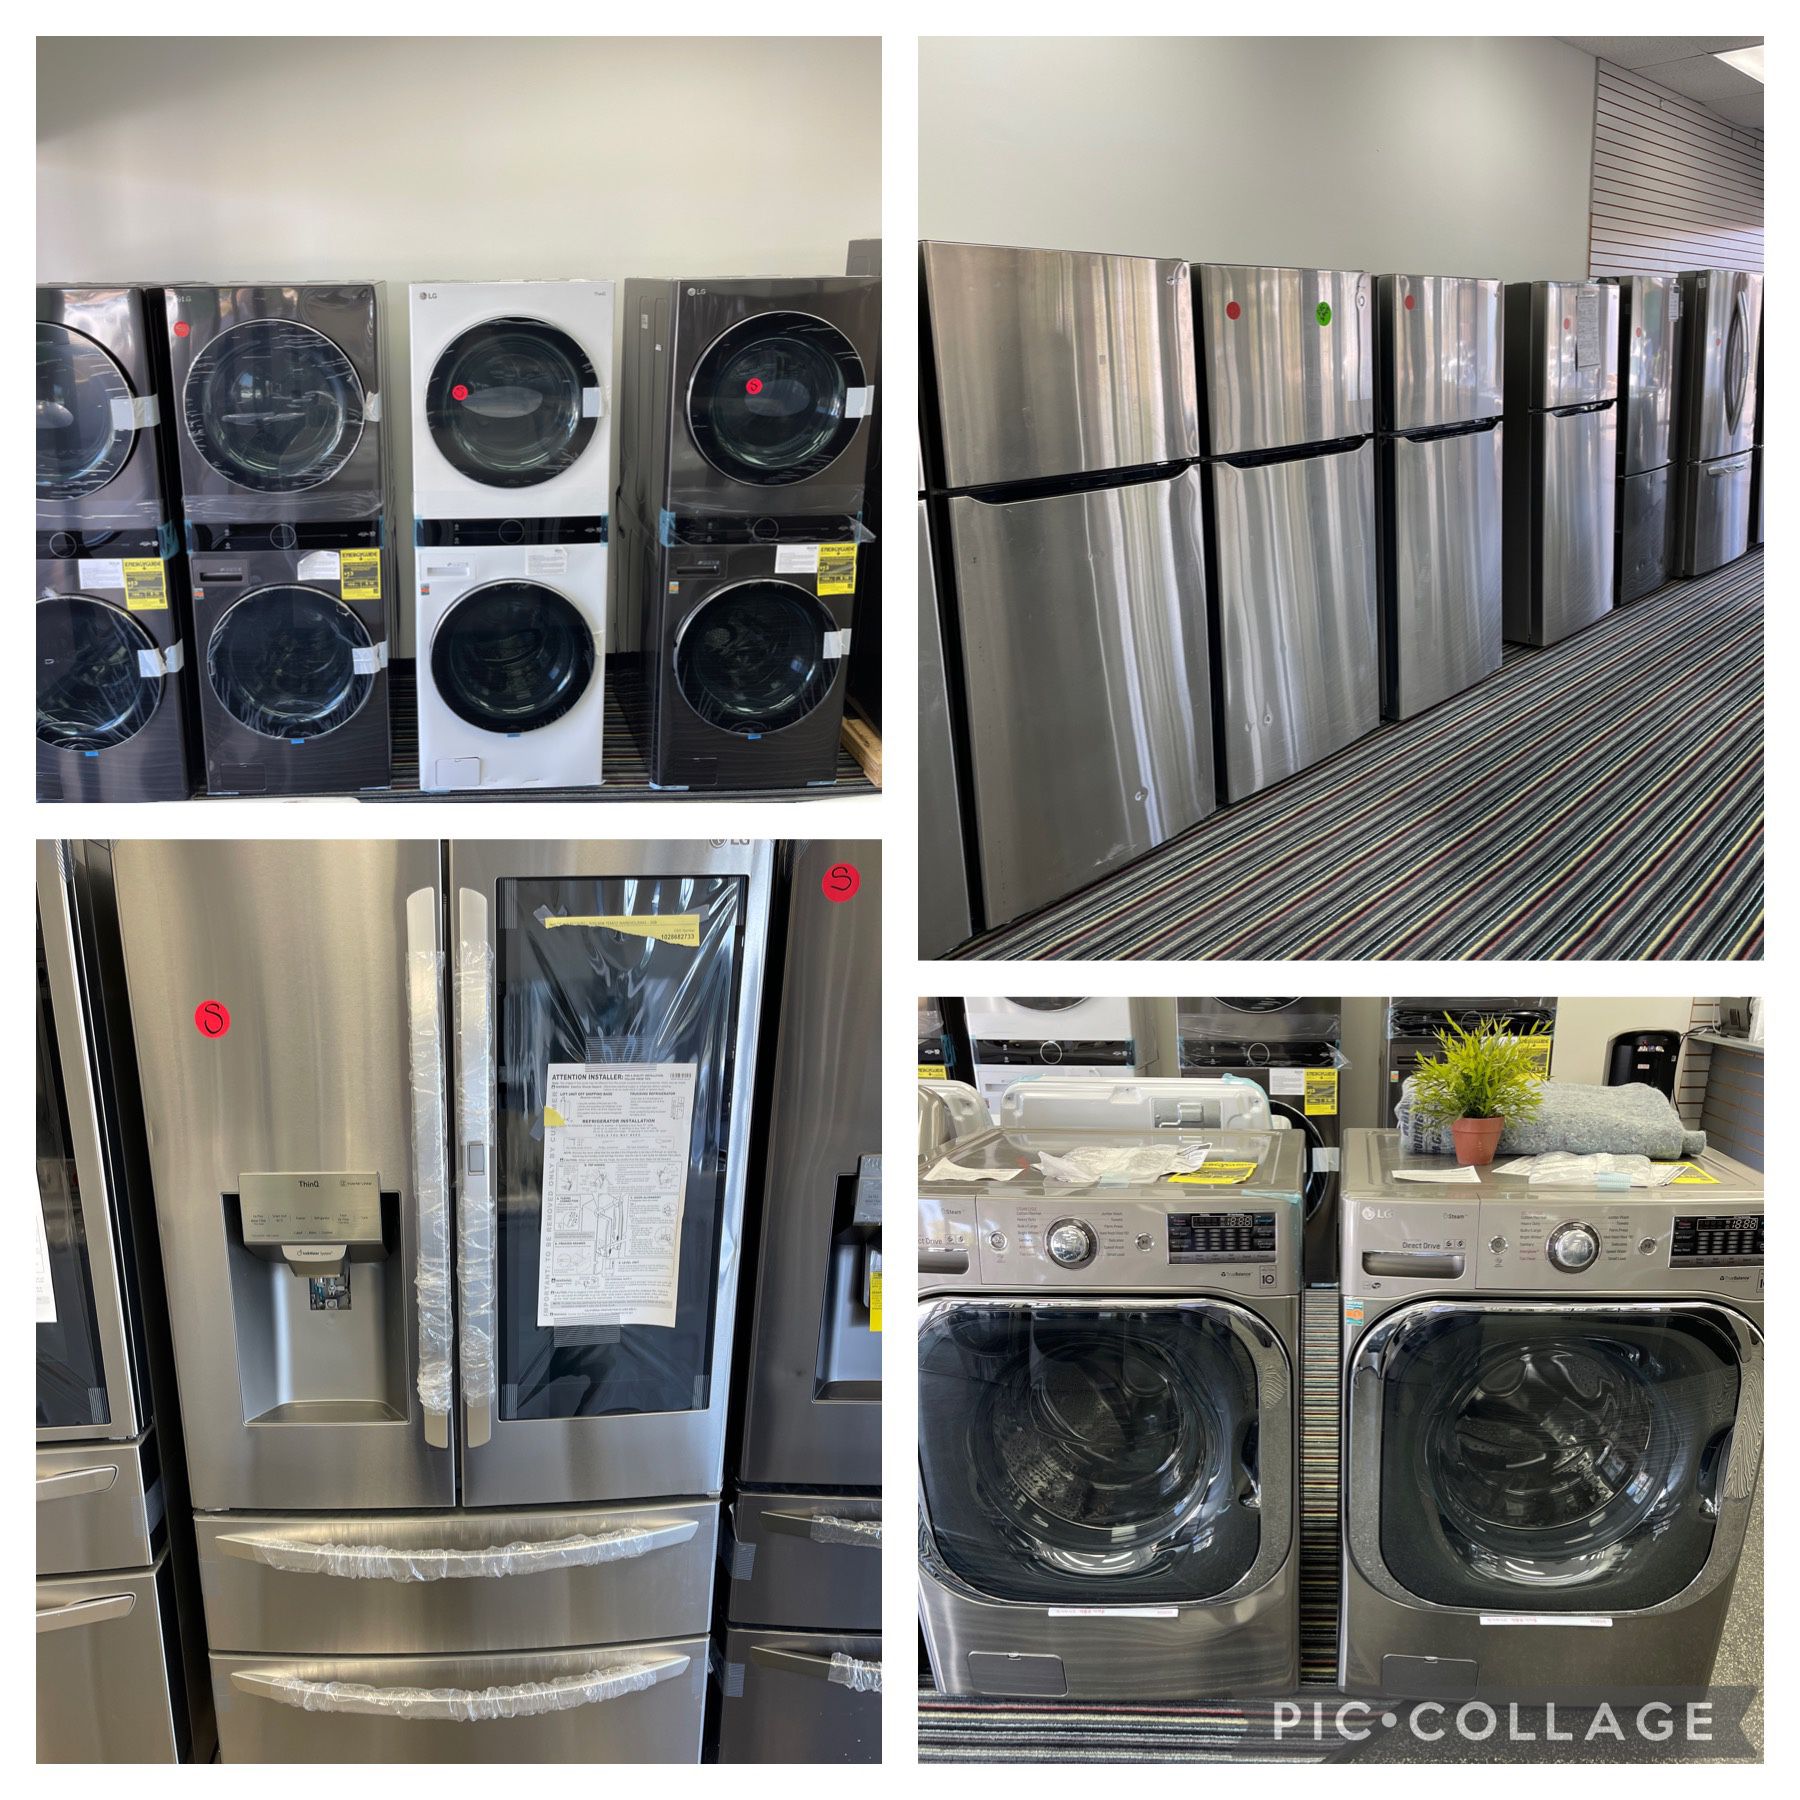 New dent & scratched Washers, Dryers, Refrigerator, Dishwasher, Stove, And More!